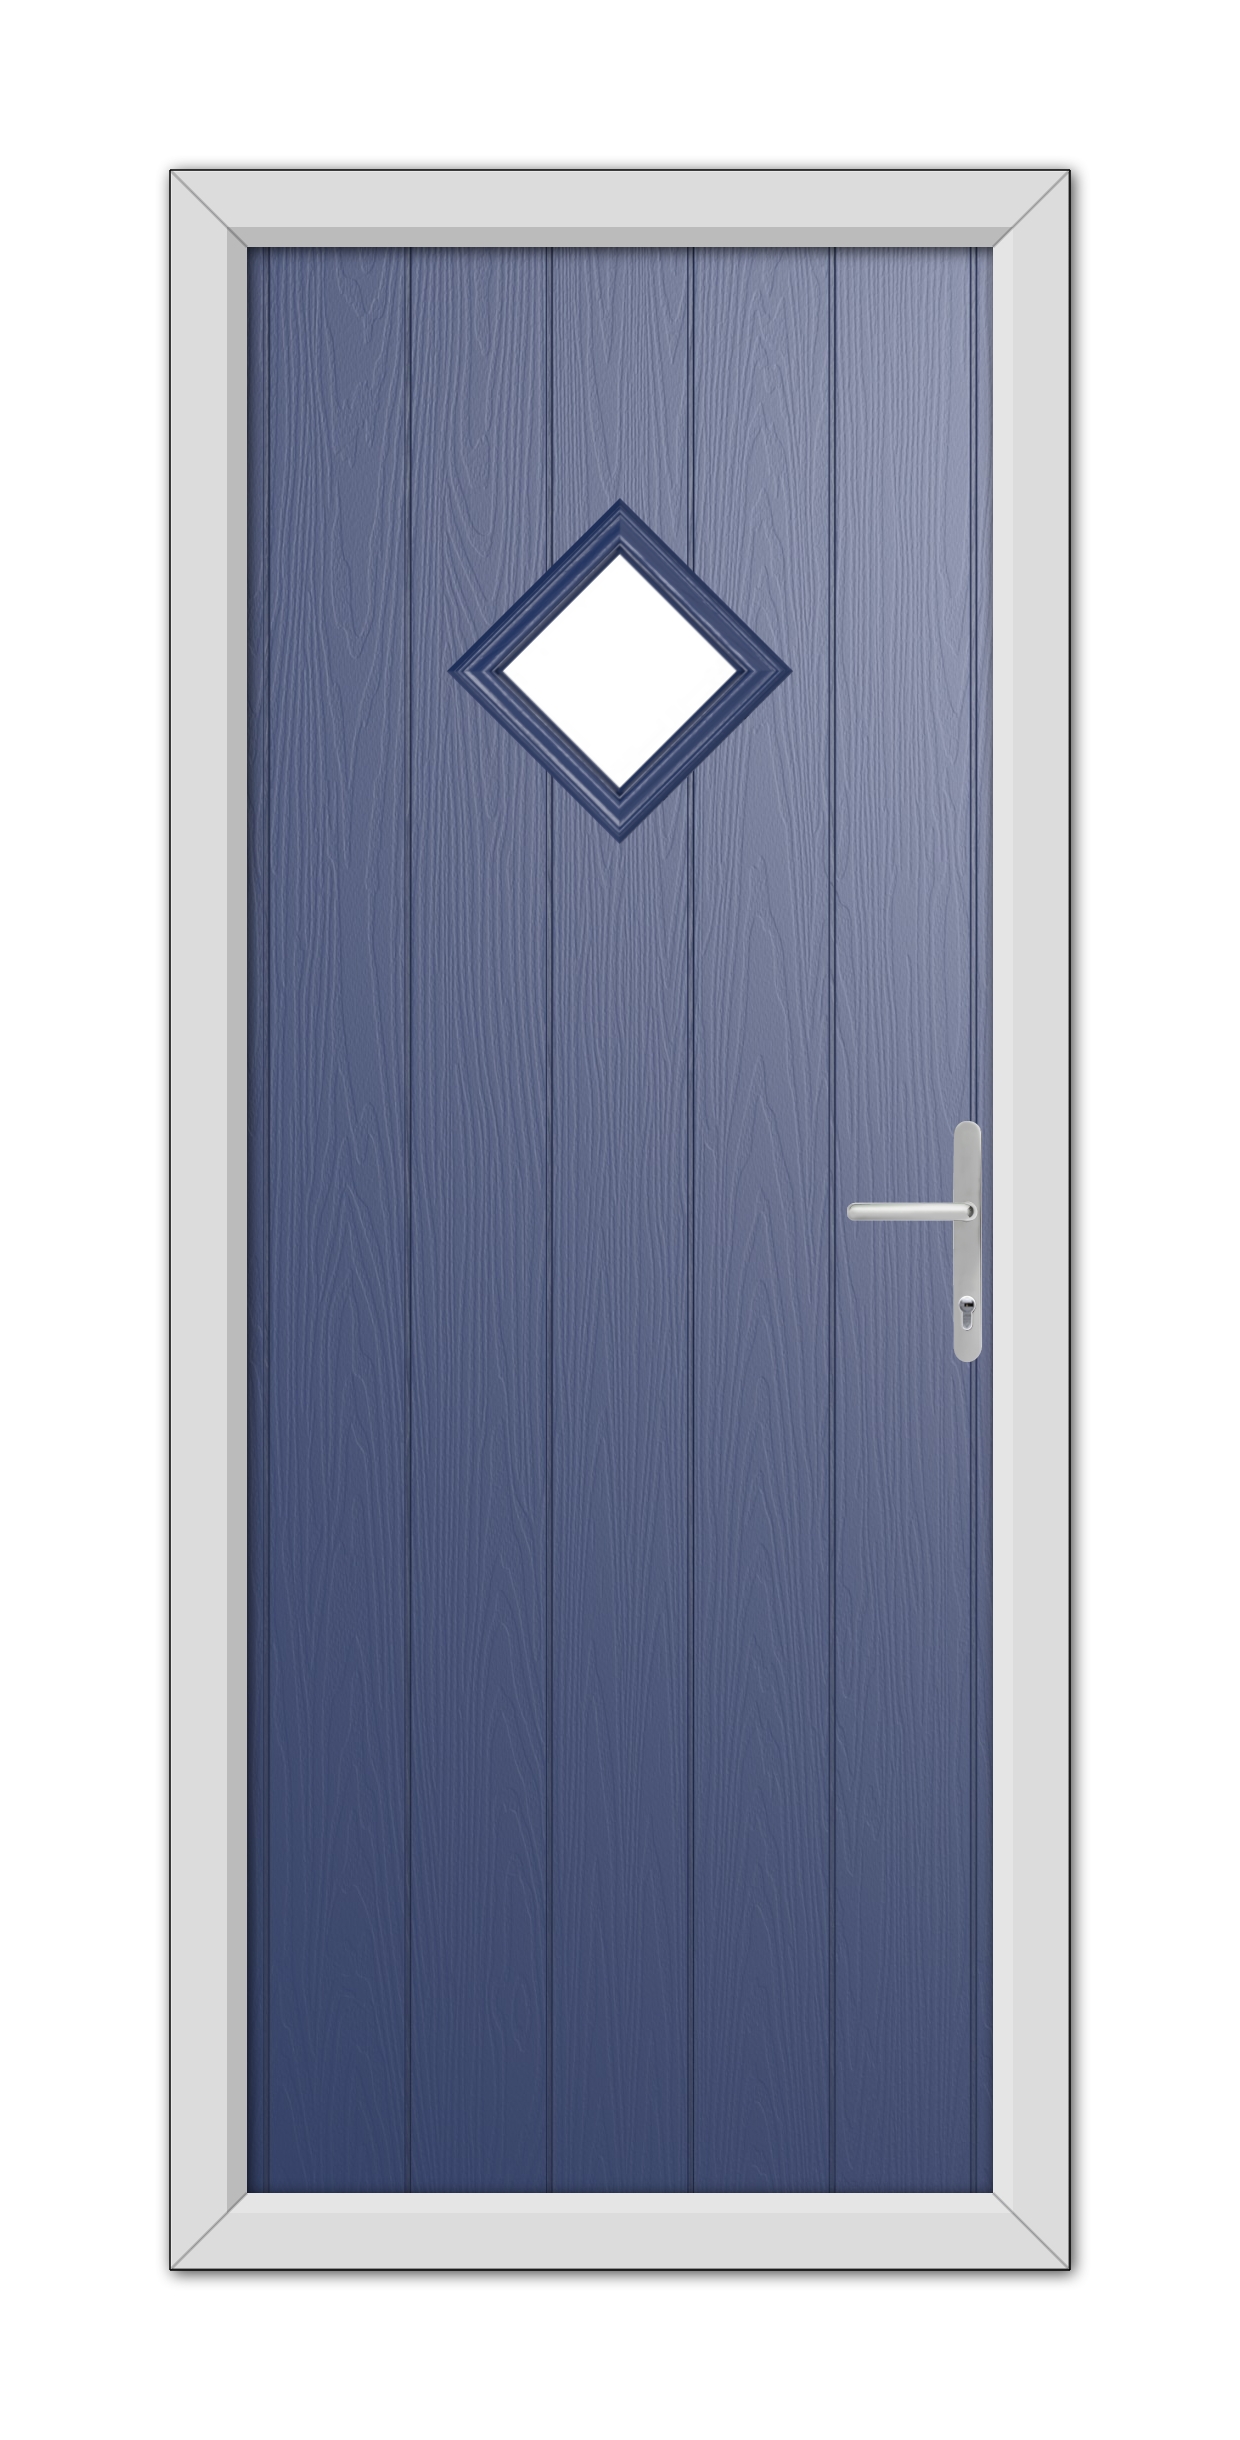 A Blue Cornwall Composite Door 48mm Timber Core with a diamond-shaped window and a modern handle, set within a white frame.